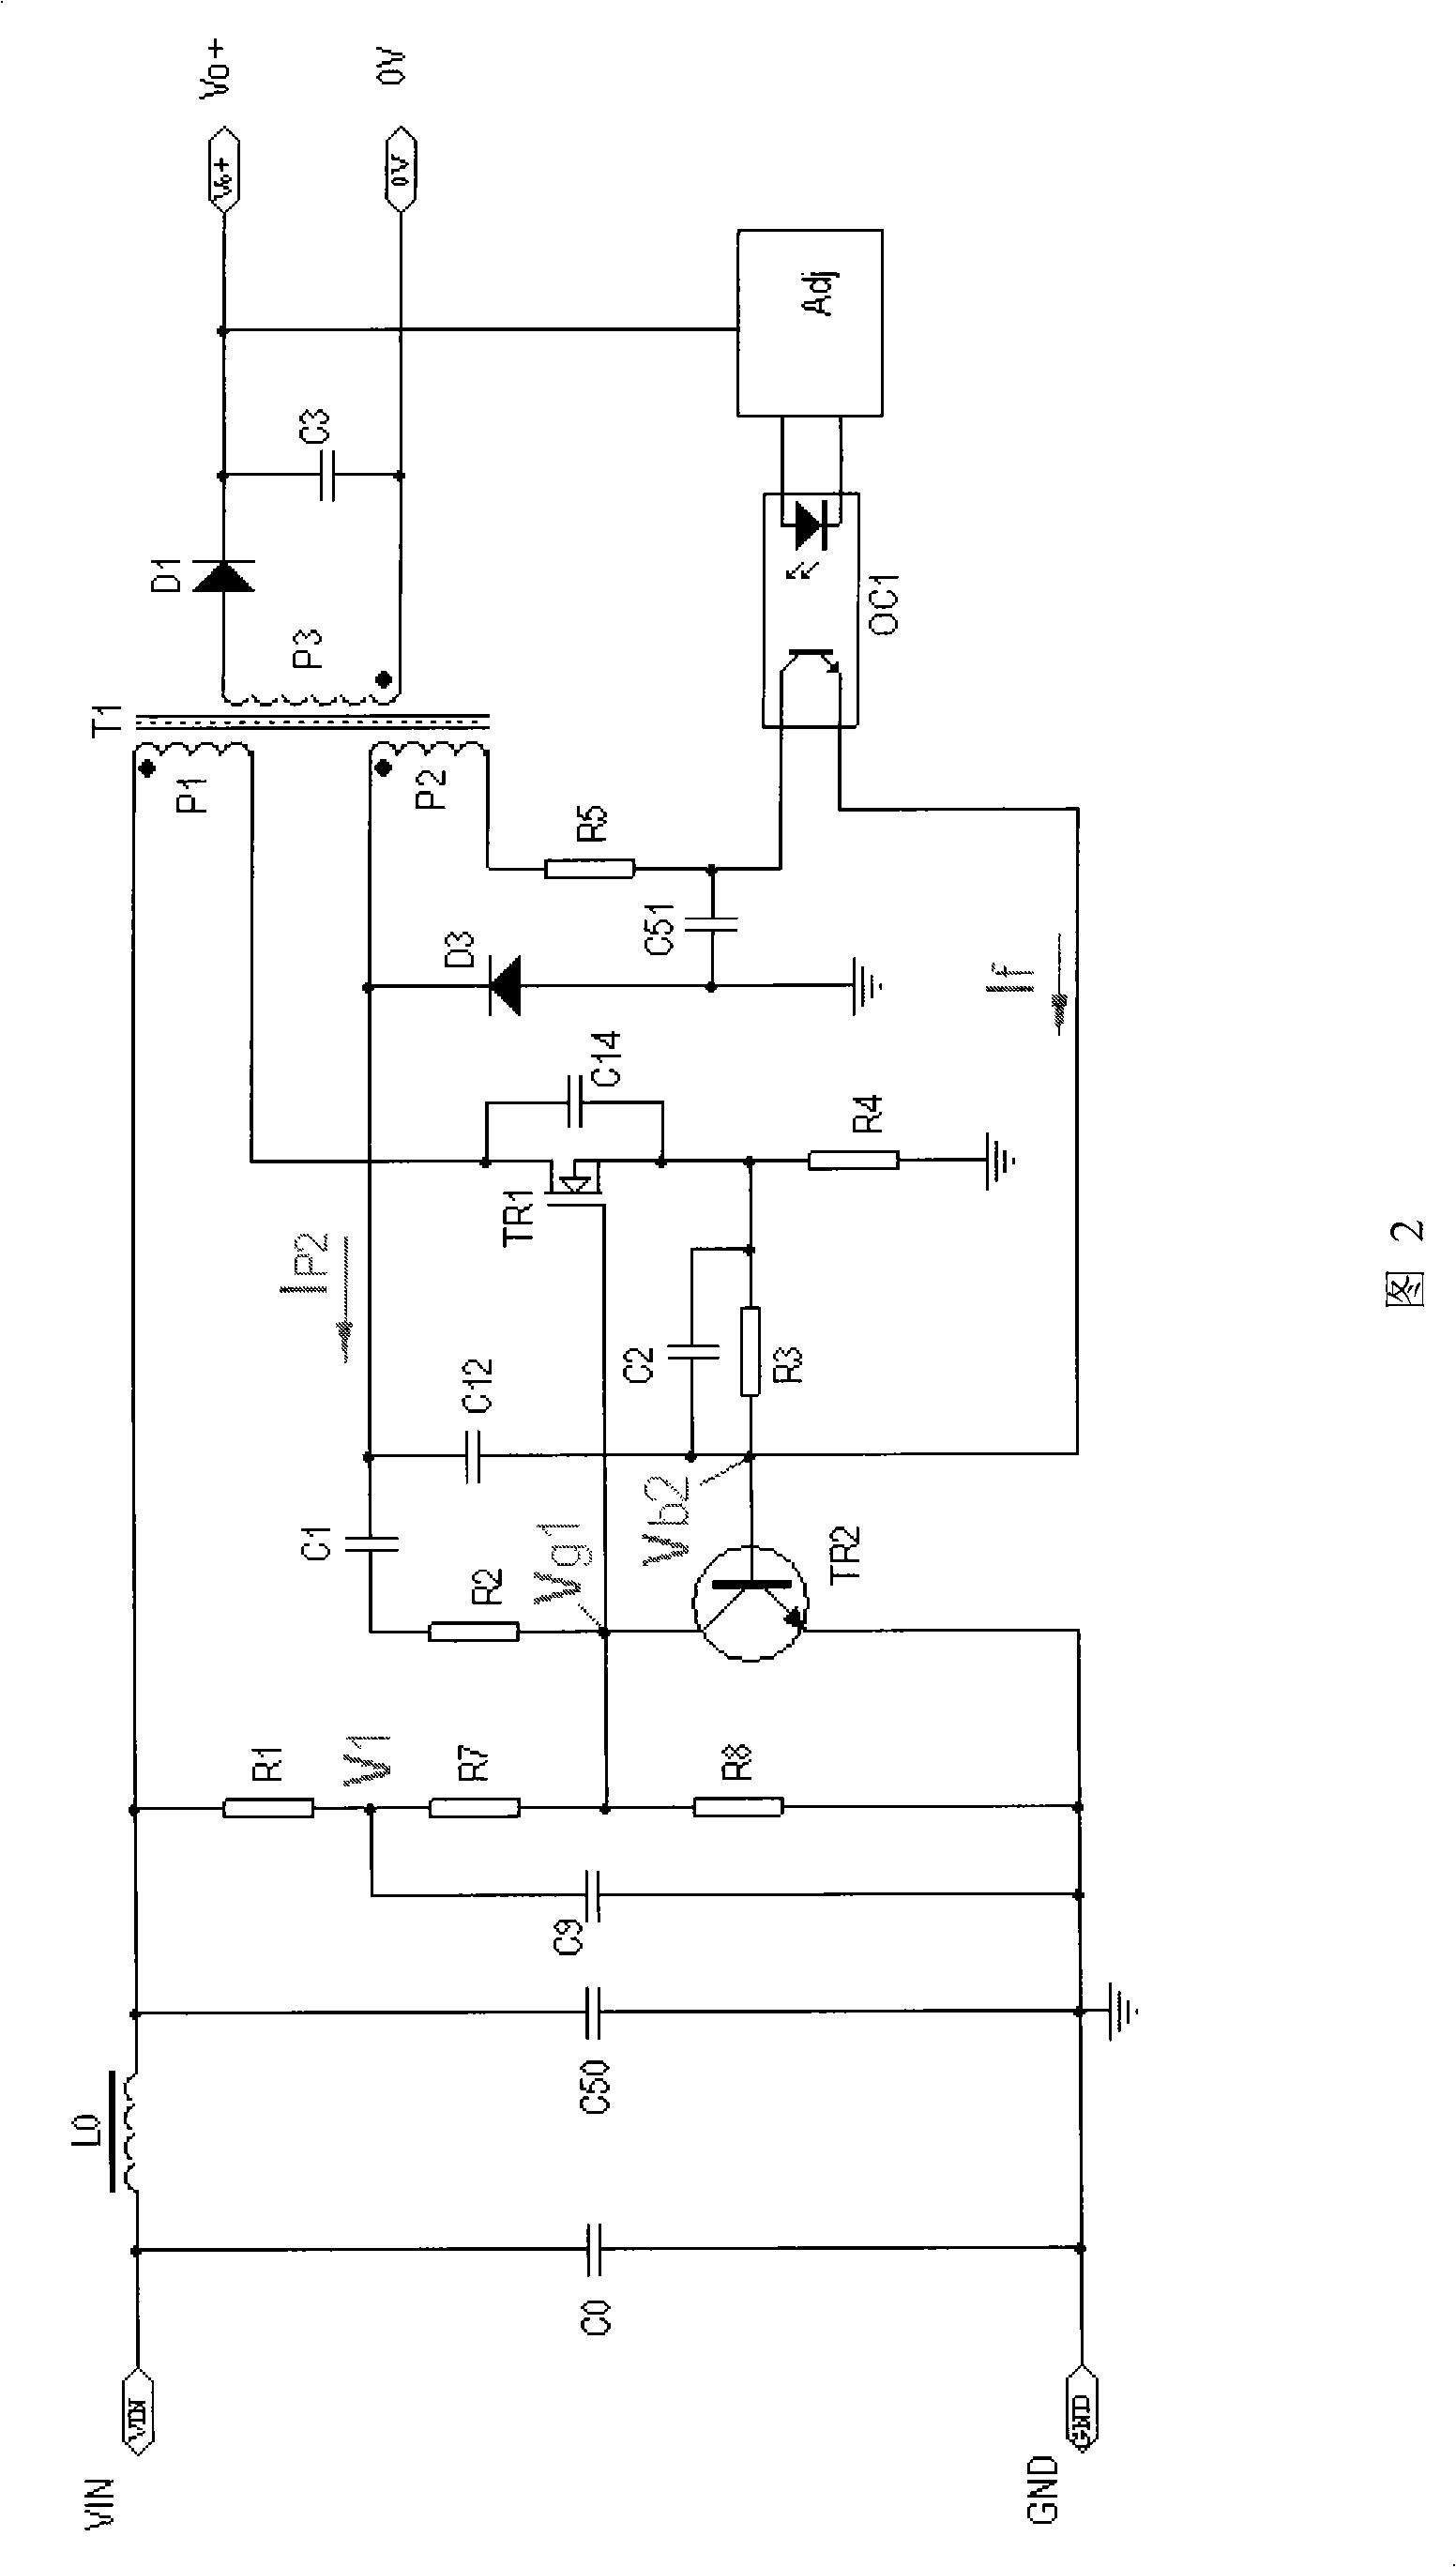 Twin-triode current control type self-oscillation flyback converter